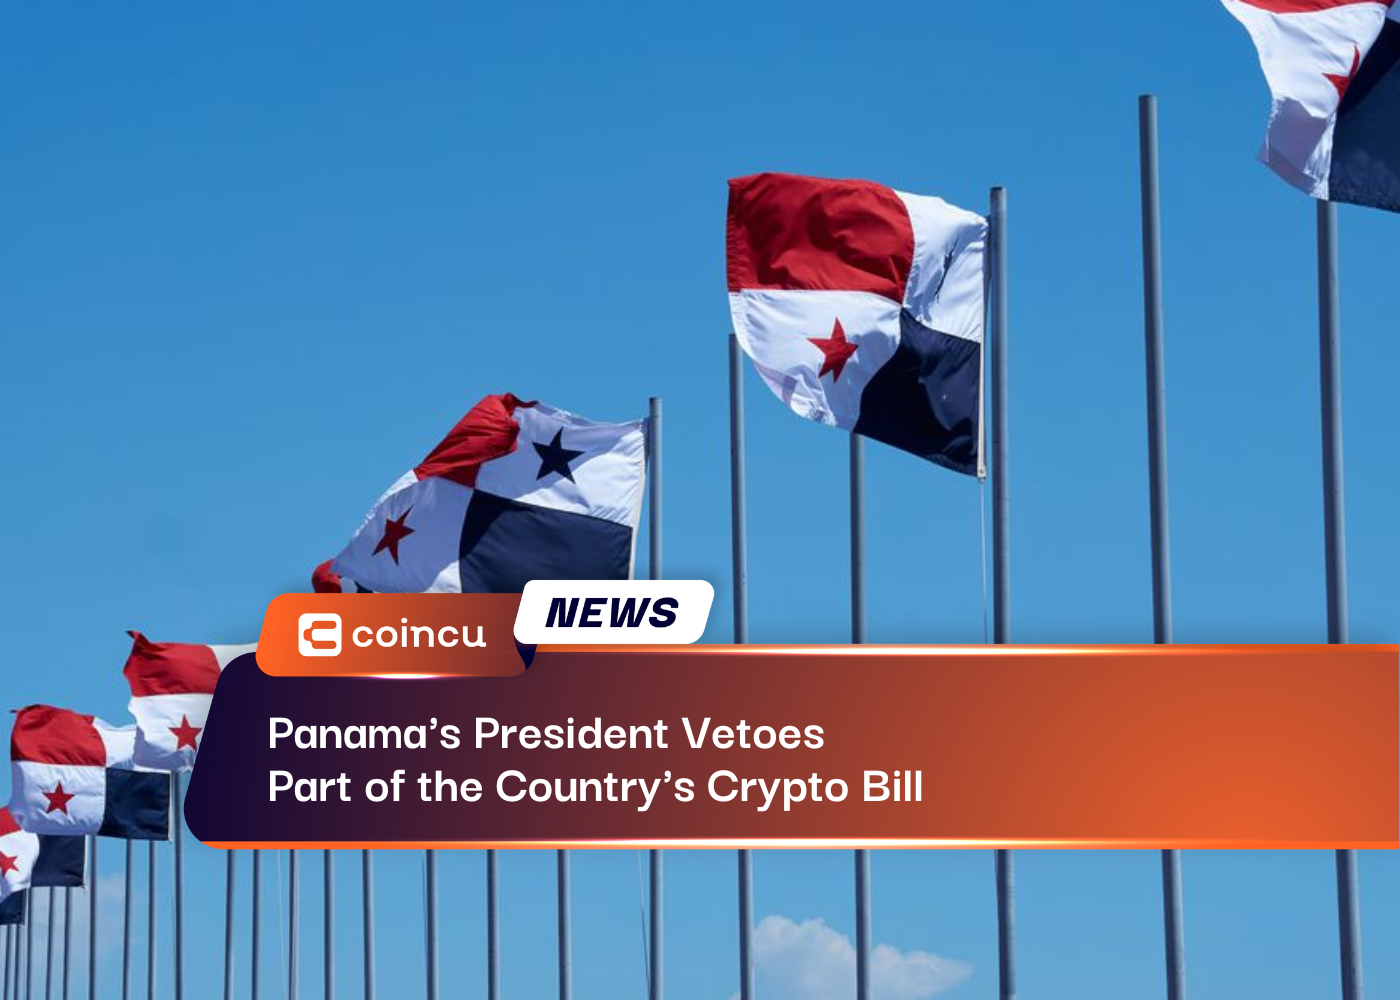 Panama's President Vetoes Part of the Country's Crypto Bill